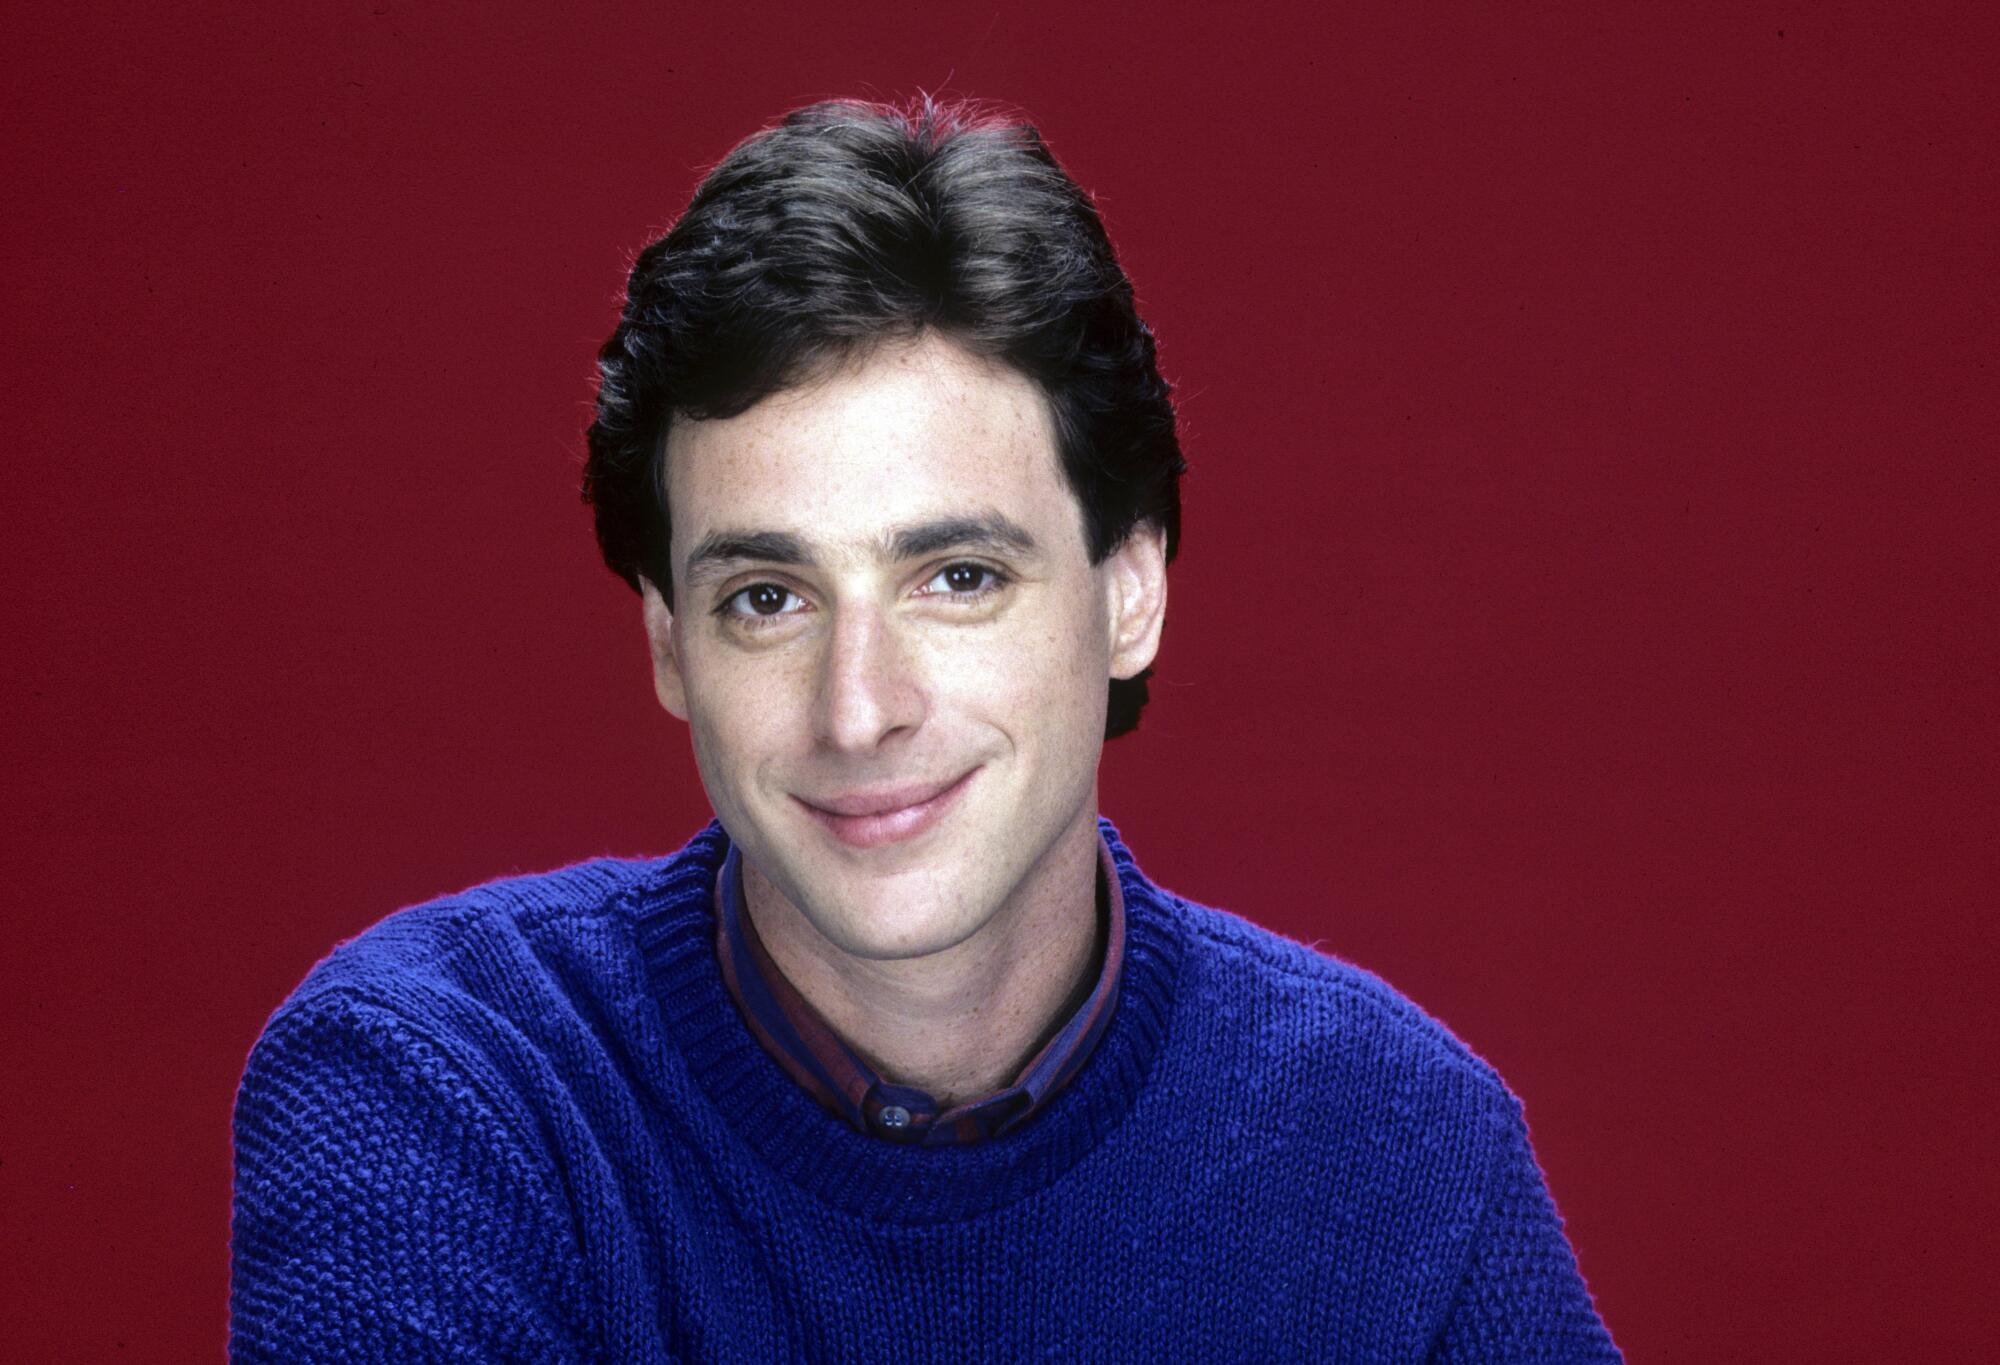 Bob Saget, known for his role on the TV sitcom “Full House” 